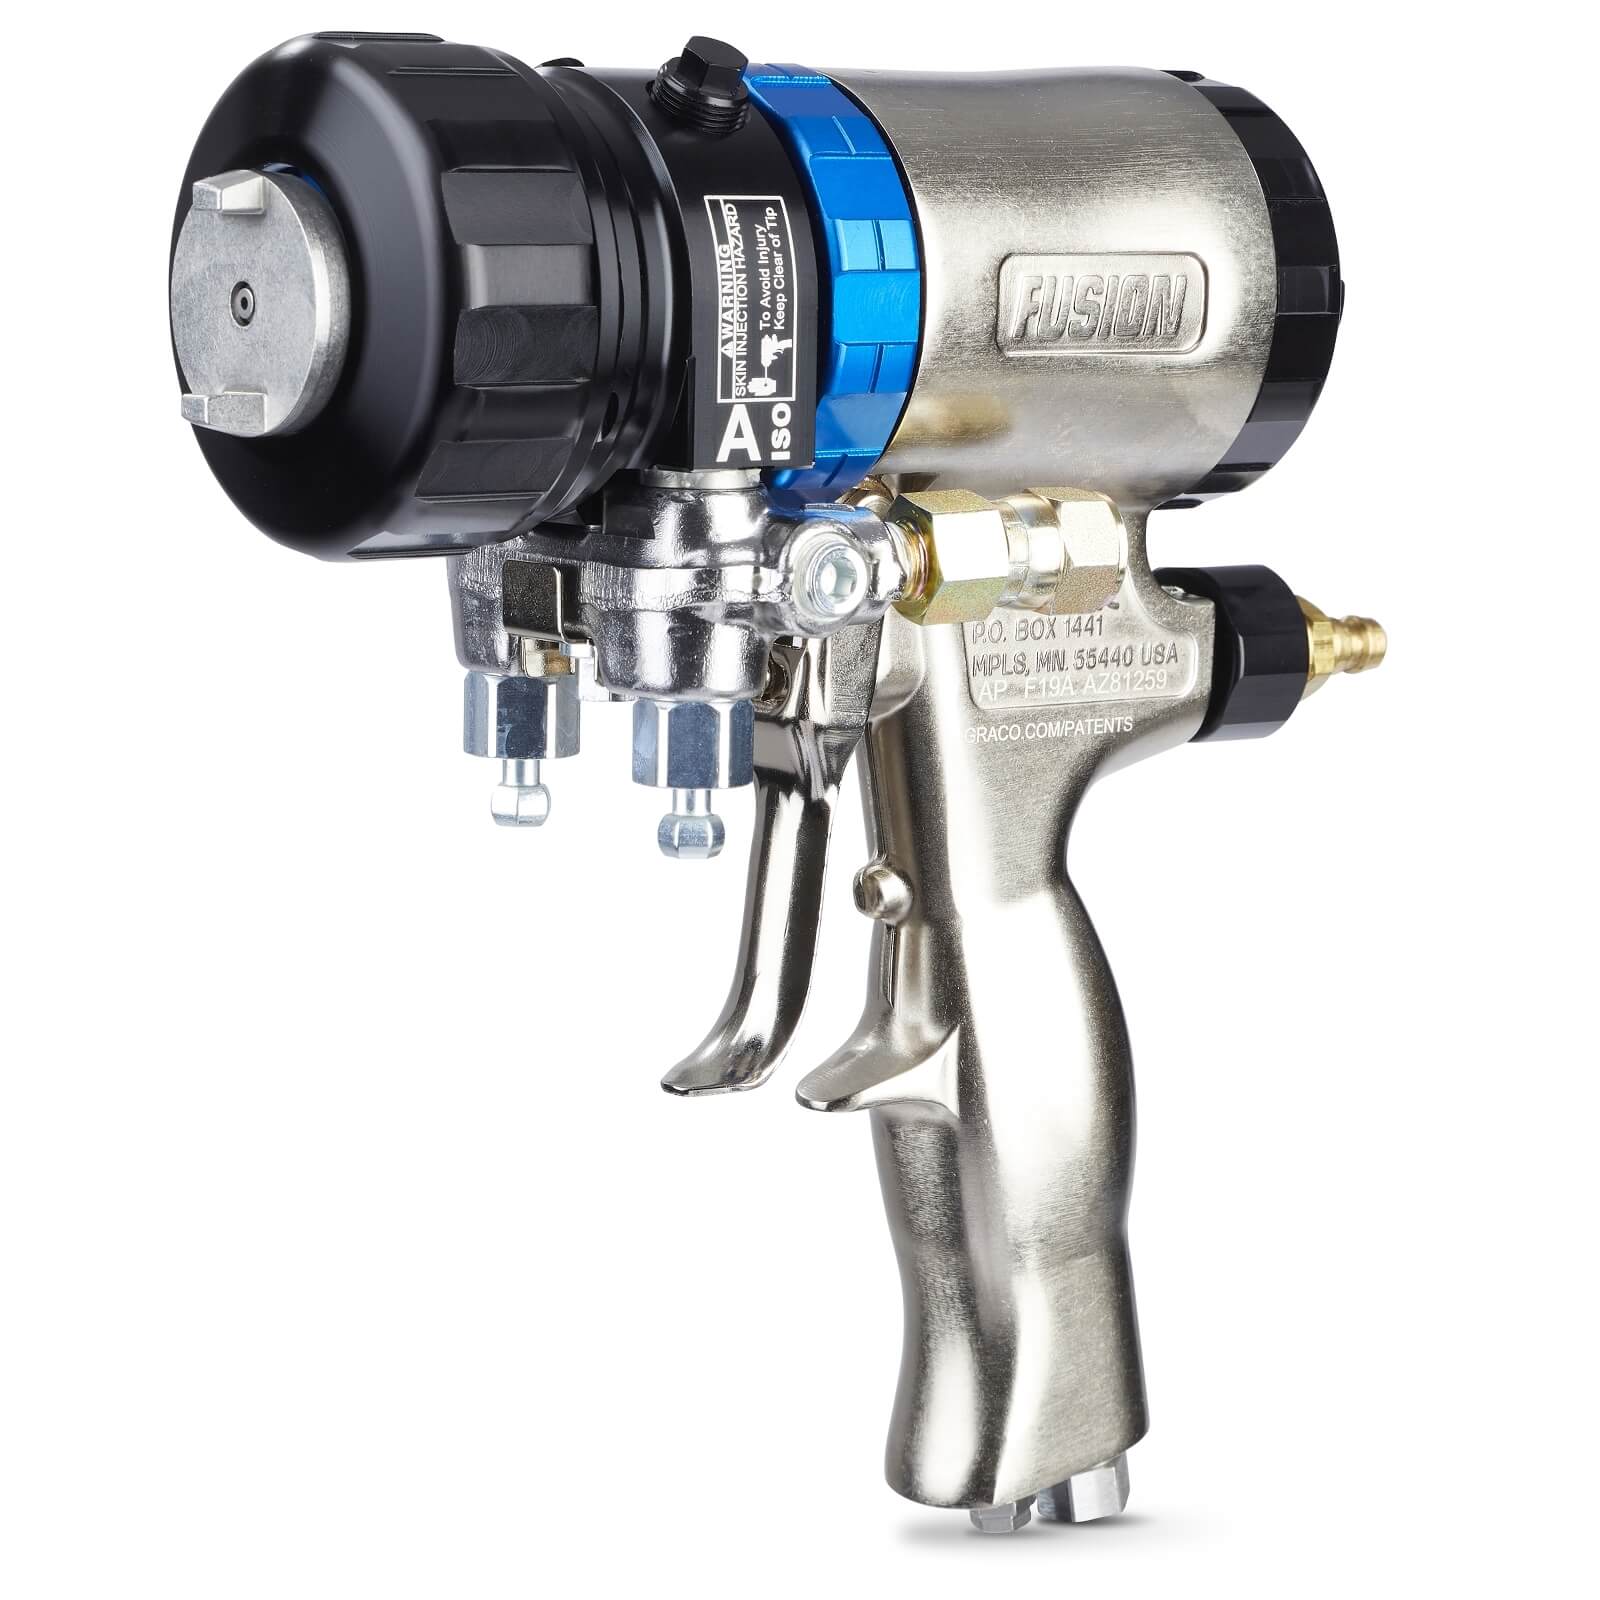 A silver, black and blue insulation gun (side view)